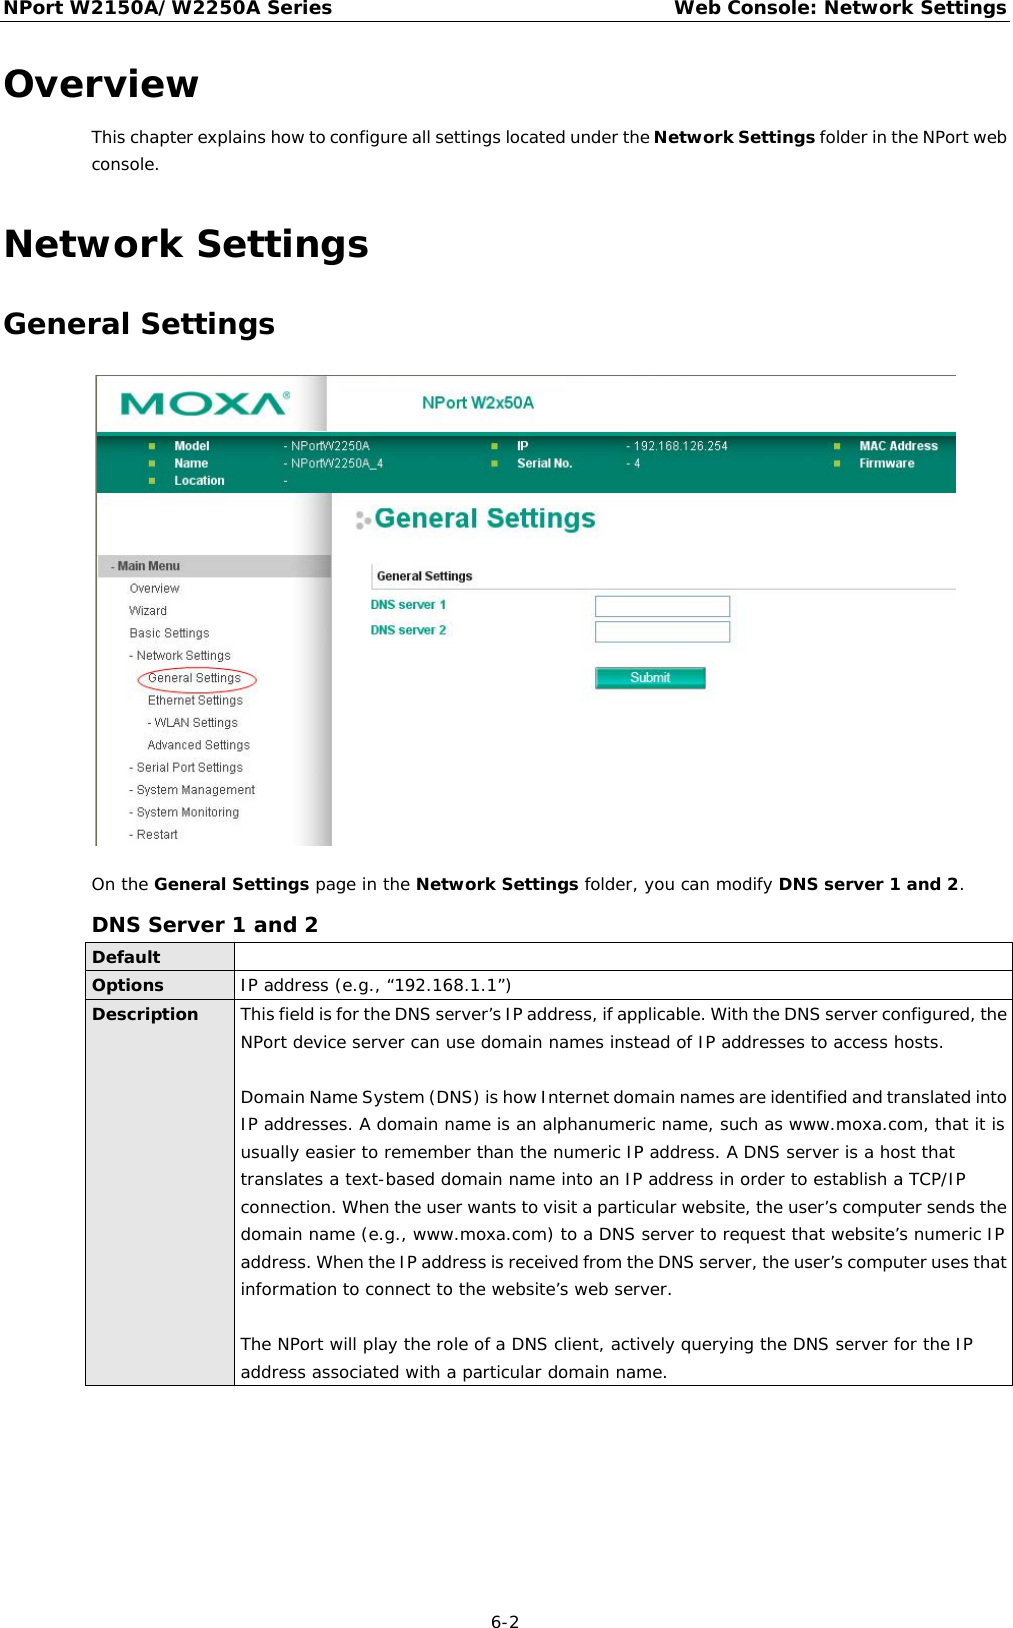 NPort W2150A/W2250A Series Web Console: Network Settings  6-2 Overview This chapter explains how to configure all settings located under the Network Settings folder in the NPort web console. Network Settings General Settings  On the General Settings page in the Network Settings folder, you can modify DNS server 1 and 2. DNS Server 1 and 2 Default  Options IP address (e.g., “192.168.1.1”) Description This field is for the DNS server’s IP address, if applicable. With the DNS server configured, the NPort device server can use domain names instead of IP addresses to access hosts.  Domain Name System (DNS) is how Internet domain names are identified and translated into IP addresses. A domain name is an alphanumeric name, such as www.moxa.com, that it is usually easier to remember than the numeric IP address. A DNS server is a host that translates a text-based domain name into an IP address in order to establish a TCP/IP connection. When the user wants to visit a particular website, the user’s computer sends the domain name (e.g., www.moxa.com) to a DNS server to request that website’s numeric IP address. When the IP address is received from the DNS server, the user’s computer uses that information to connect to the website’s web server.  The NPort will play the role of a DNS client, actively querying the DNS server for the IP address associated with a particular domain name. 